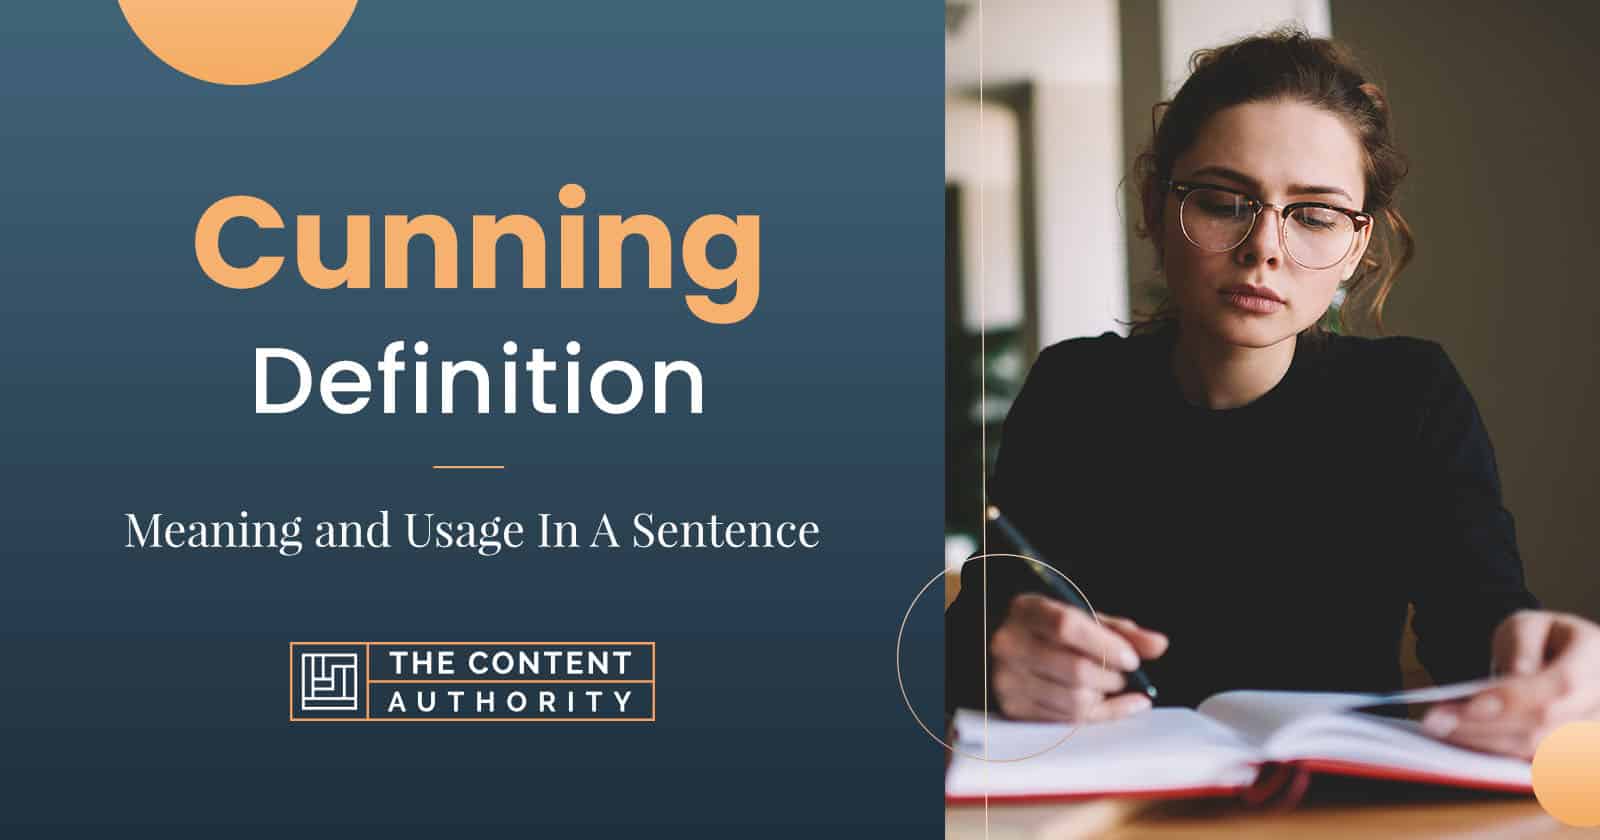 Cunning Definition – Meaning and Usage In A Sentence